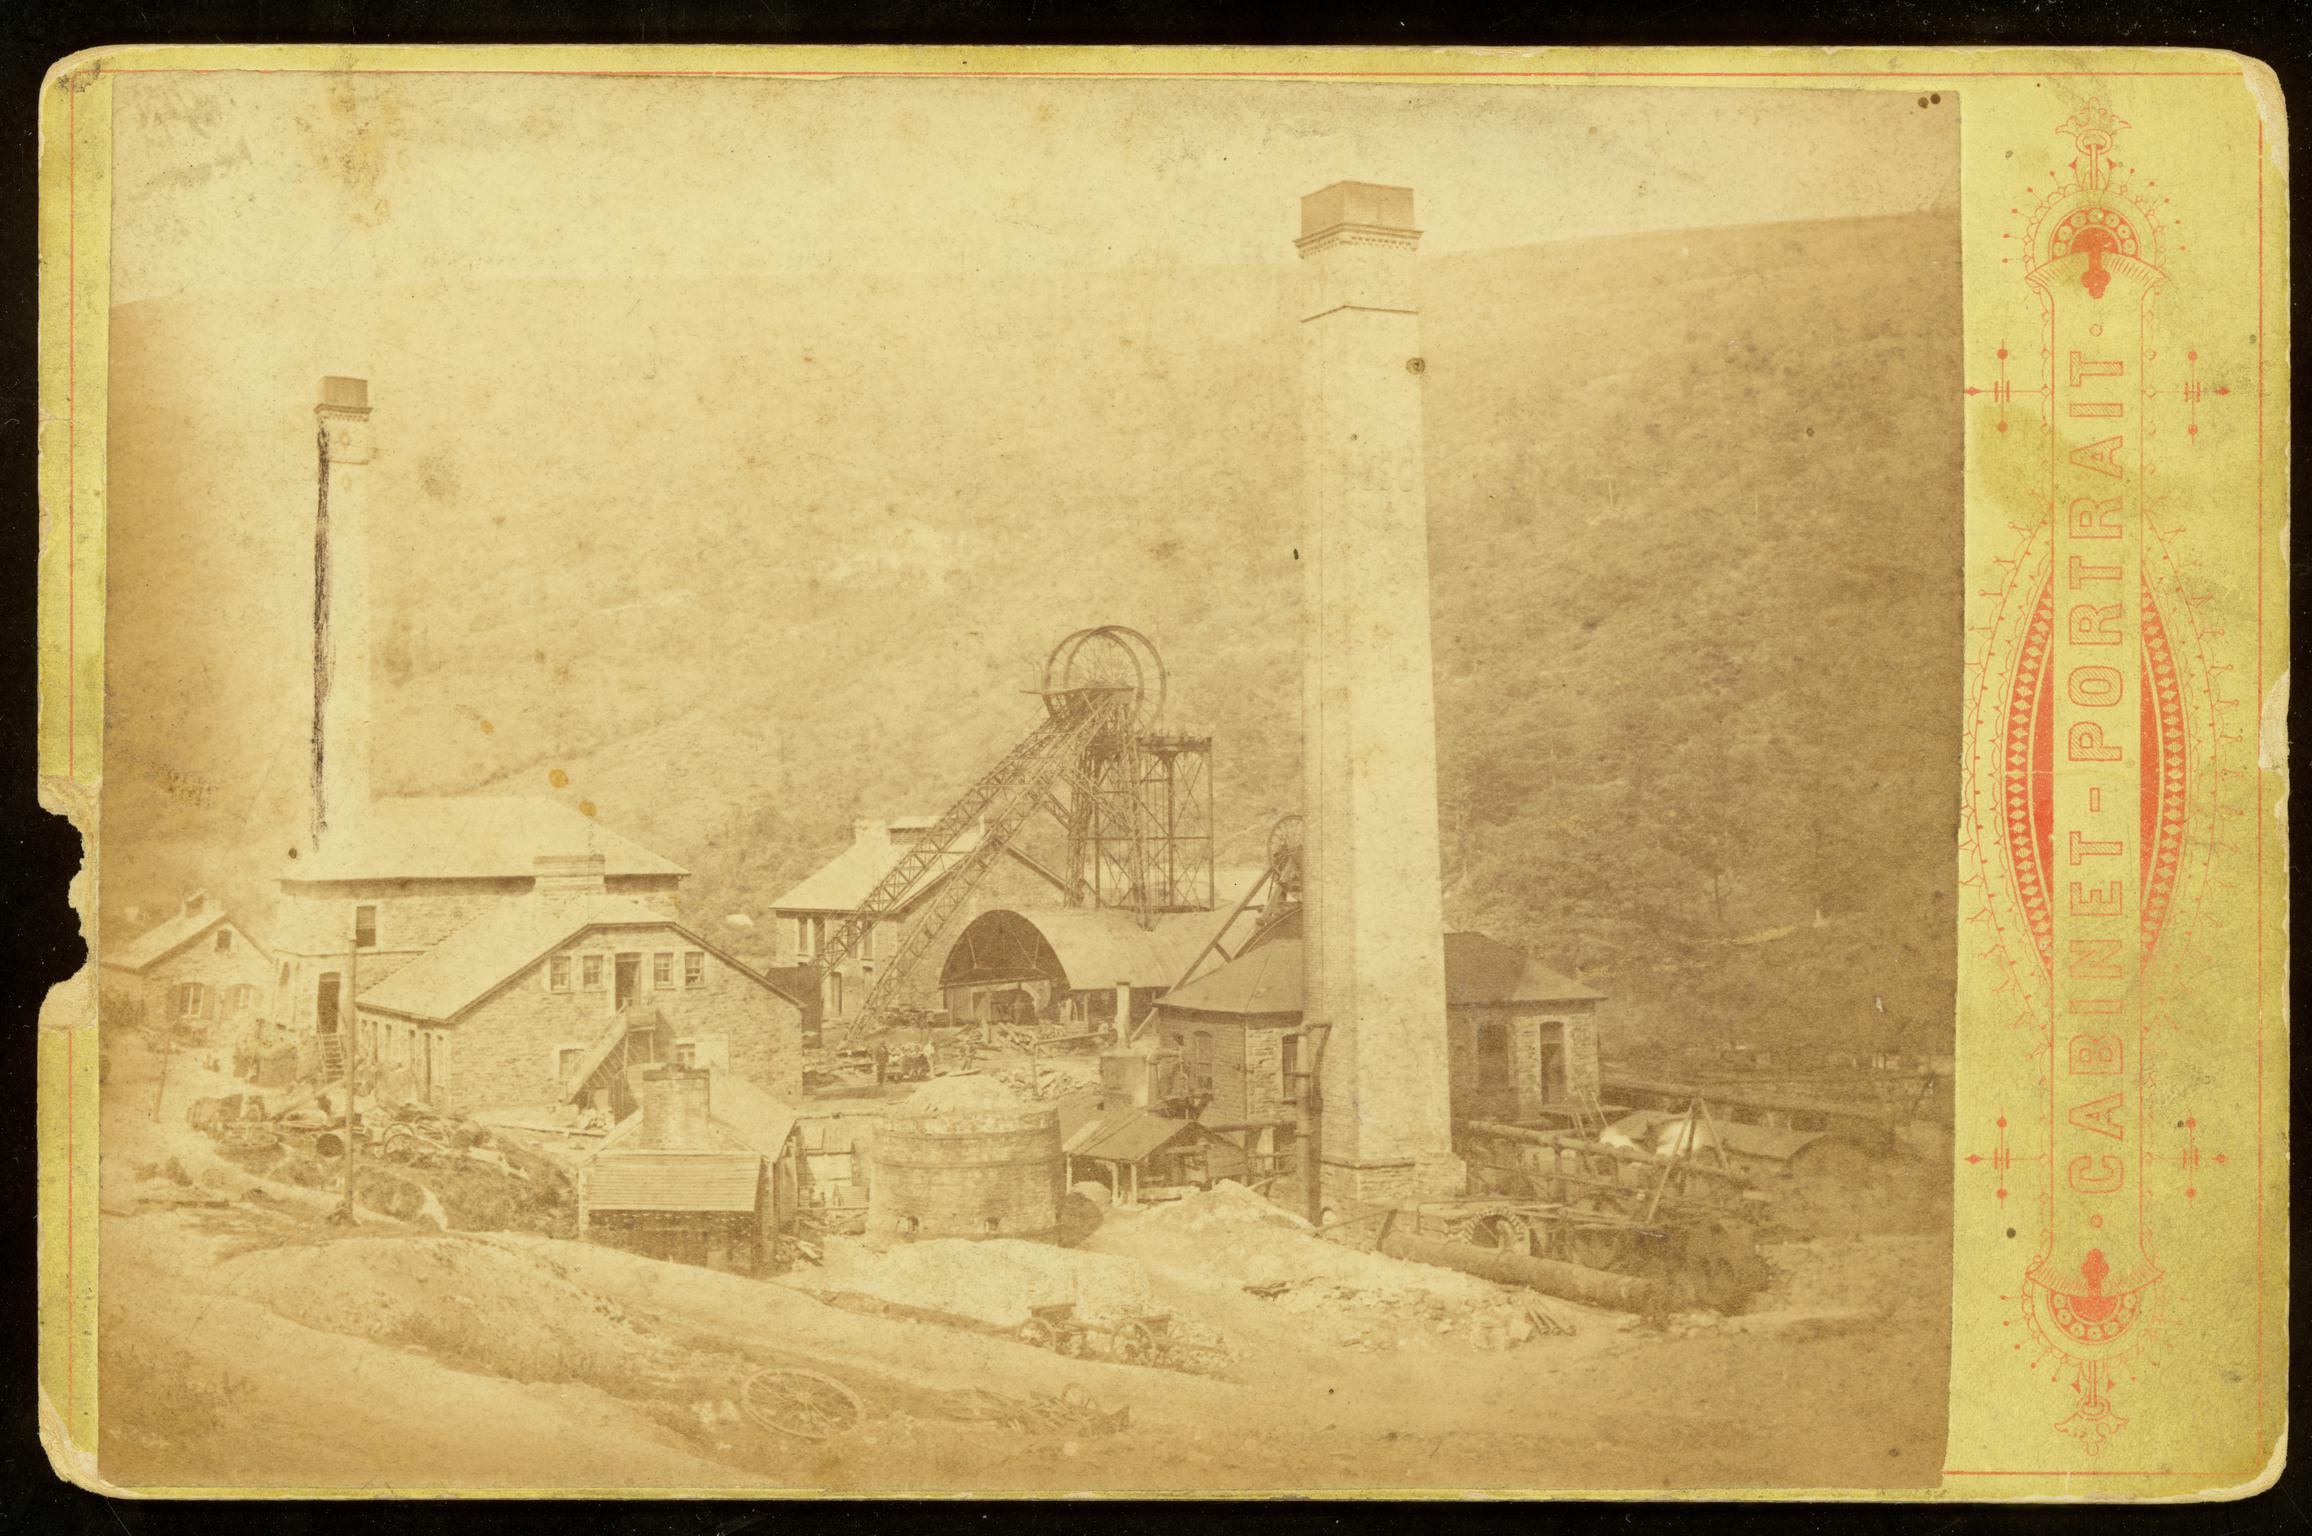 Tylorstown Colliery, photograph